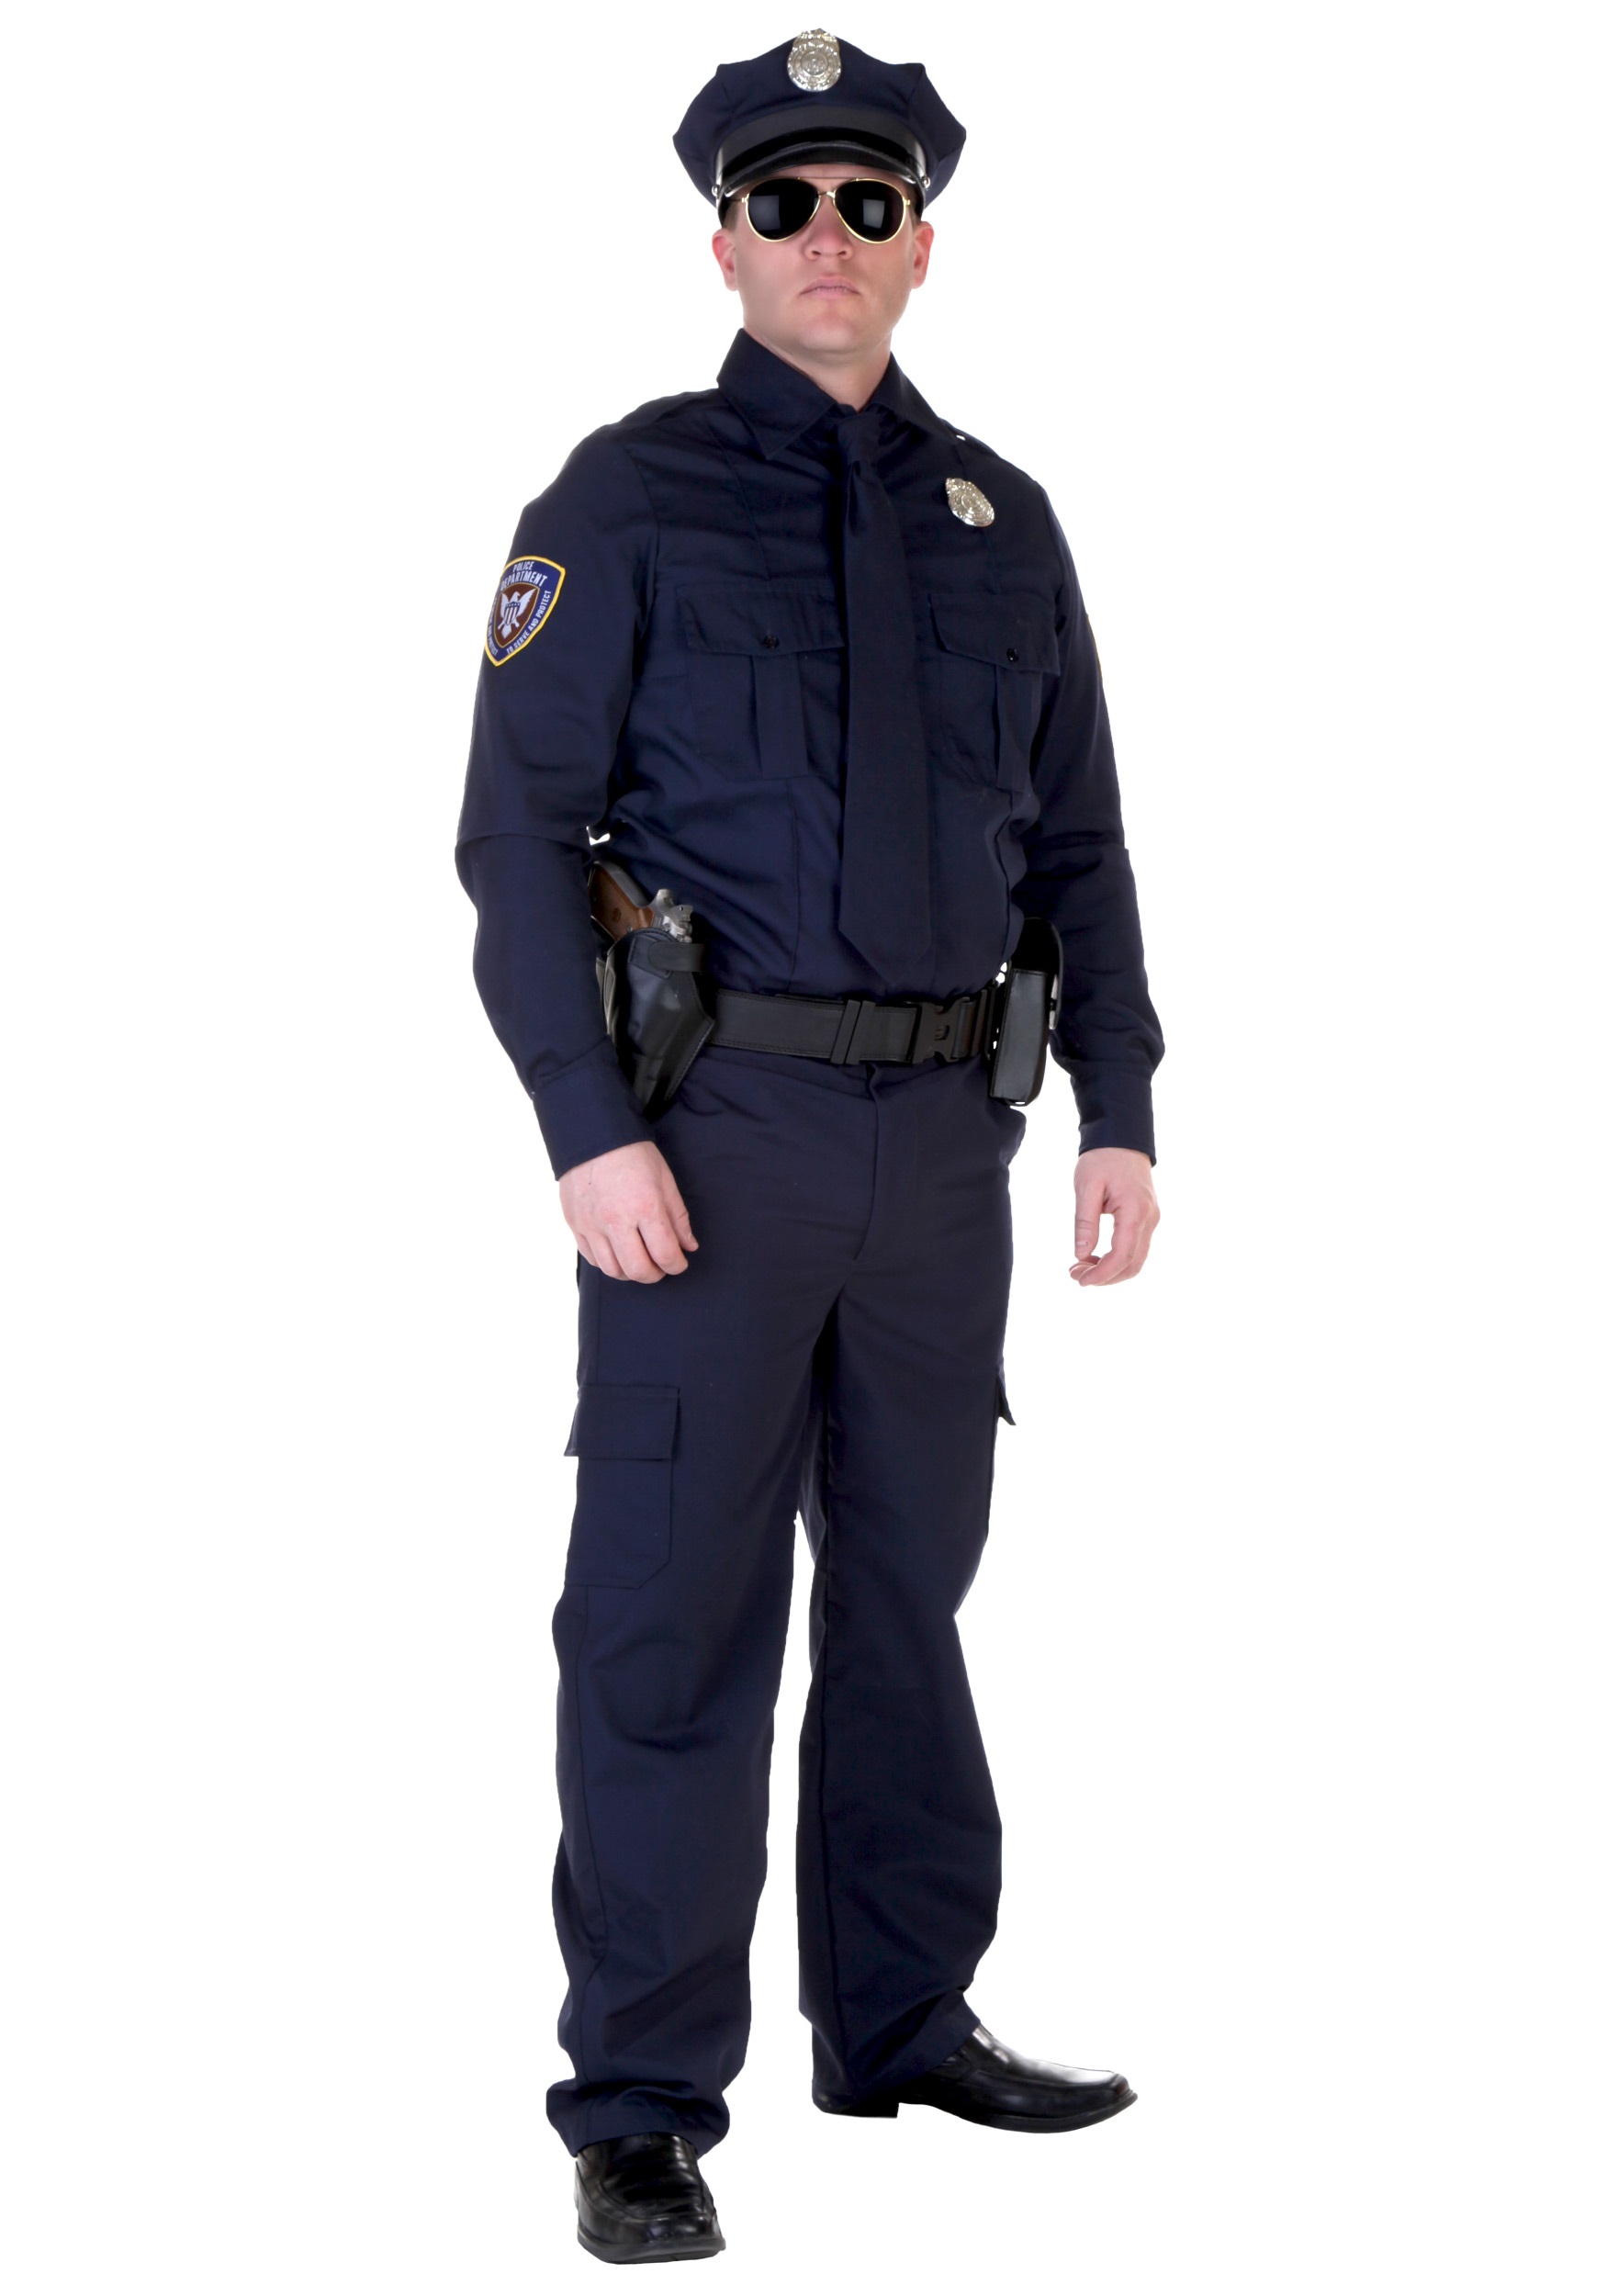 Authentic Cop Costume for Men | Police Officer Costume | Exclusive